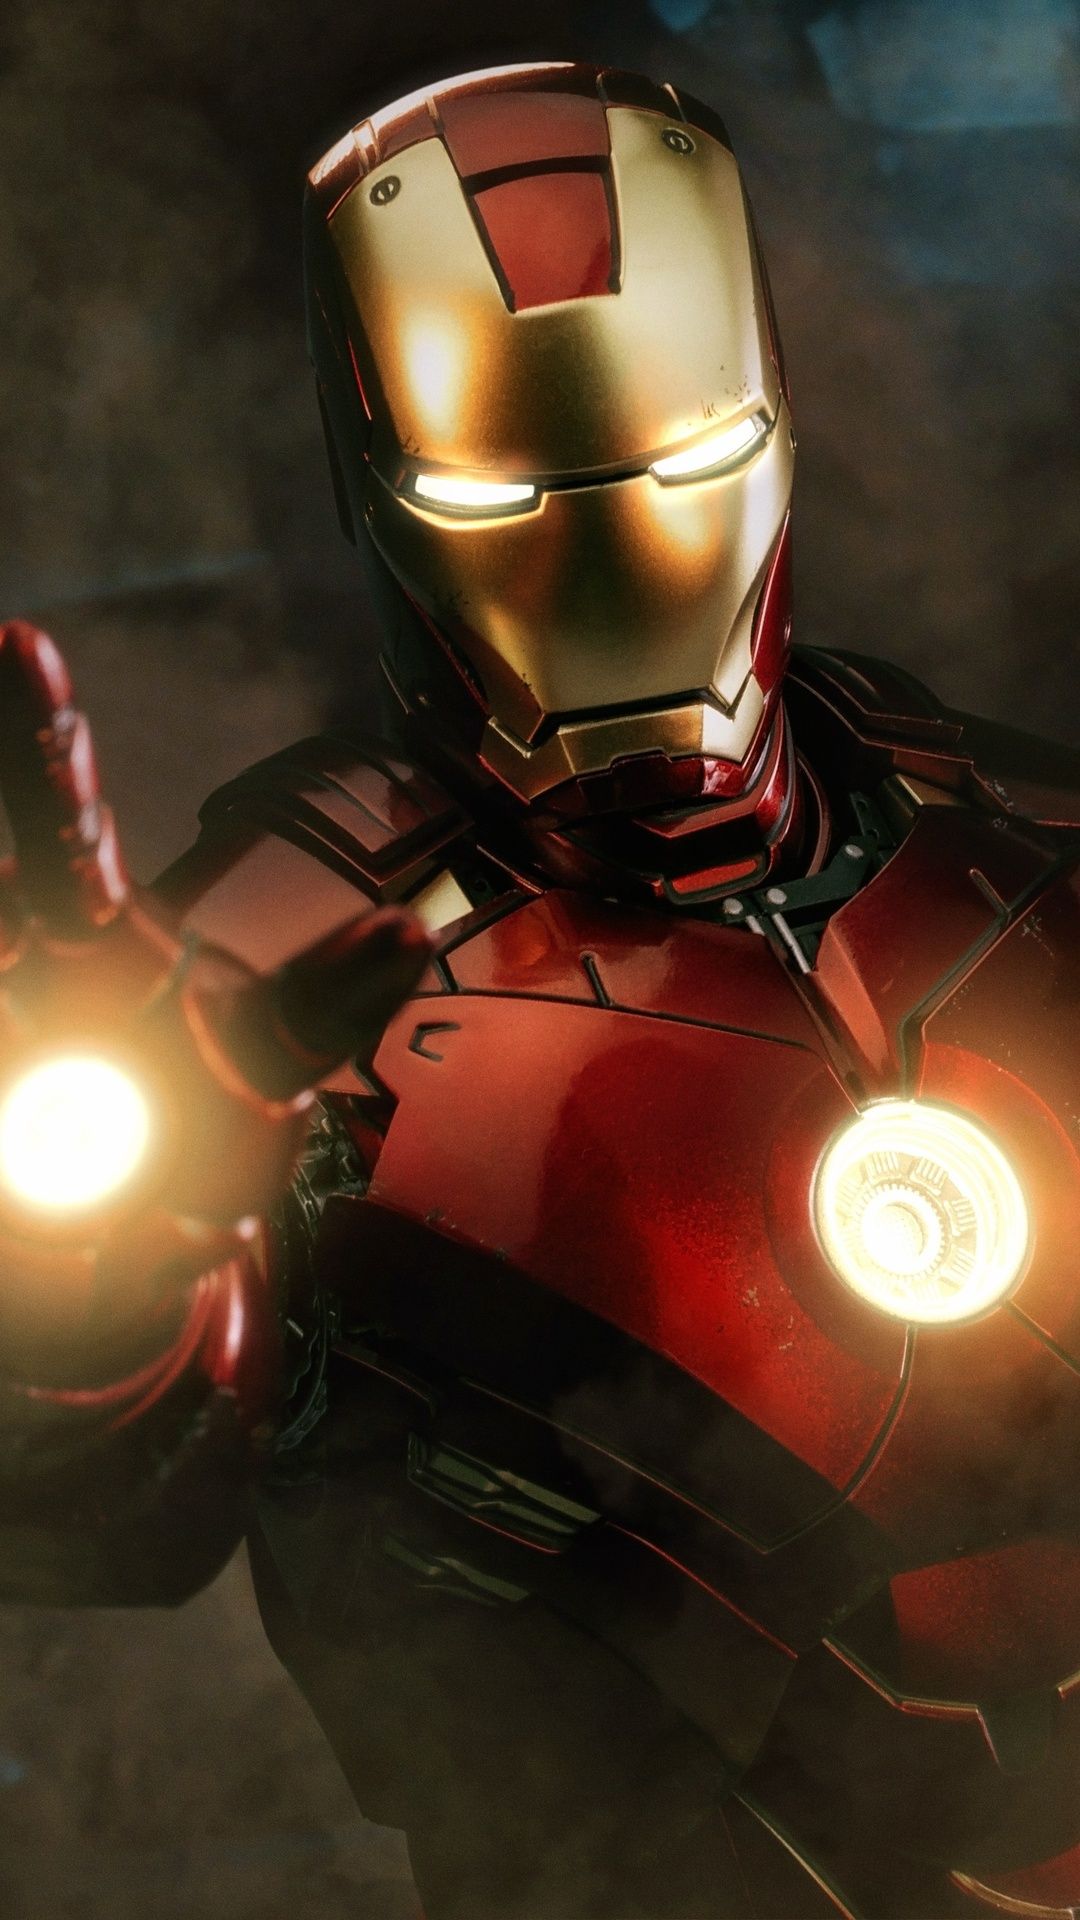 Iron Man Mark 4 iPhone 6s, 6 Plus, Pixel xl , One Plus 3t, 5 HD 4k Wallpaper, Image, Background, Photo and Picture